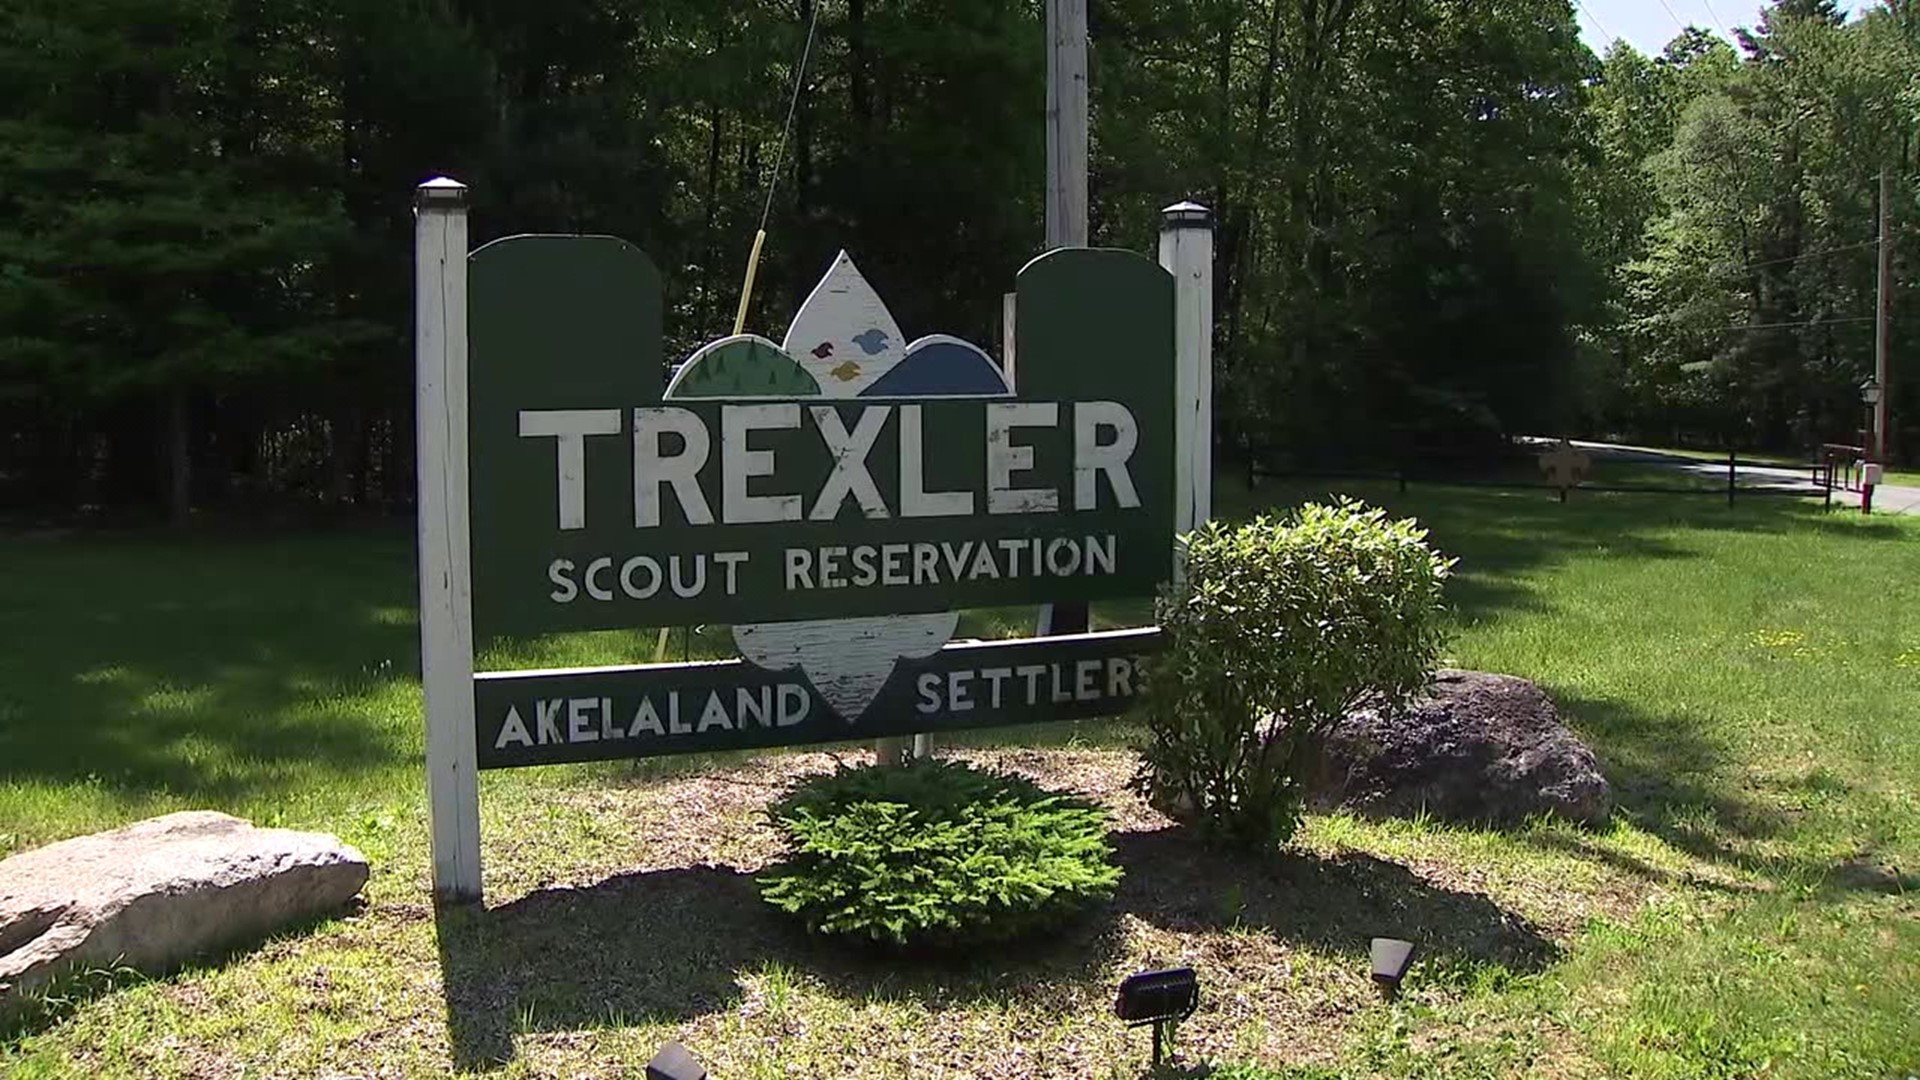 The Minsi Trails Boy Scouts Council executive board voted to sell the 755-acre Trexler Scout Reservation to the Trexler Veterans Initiative for $7.8 million.